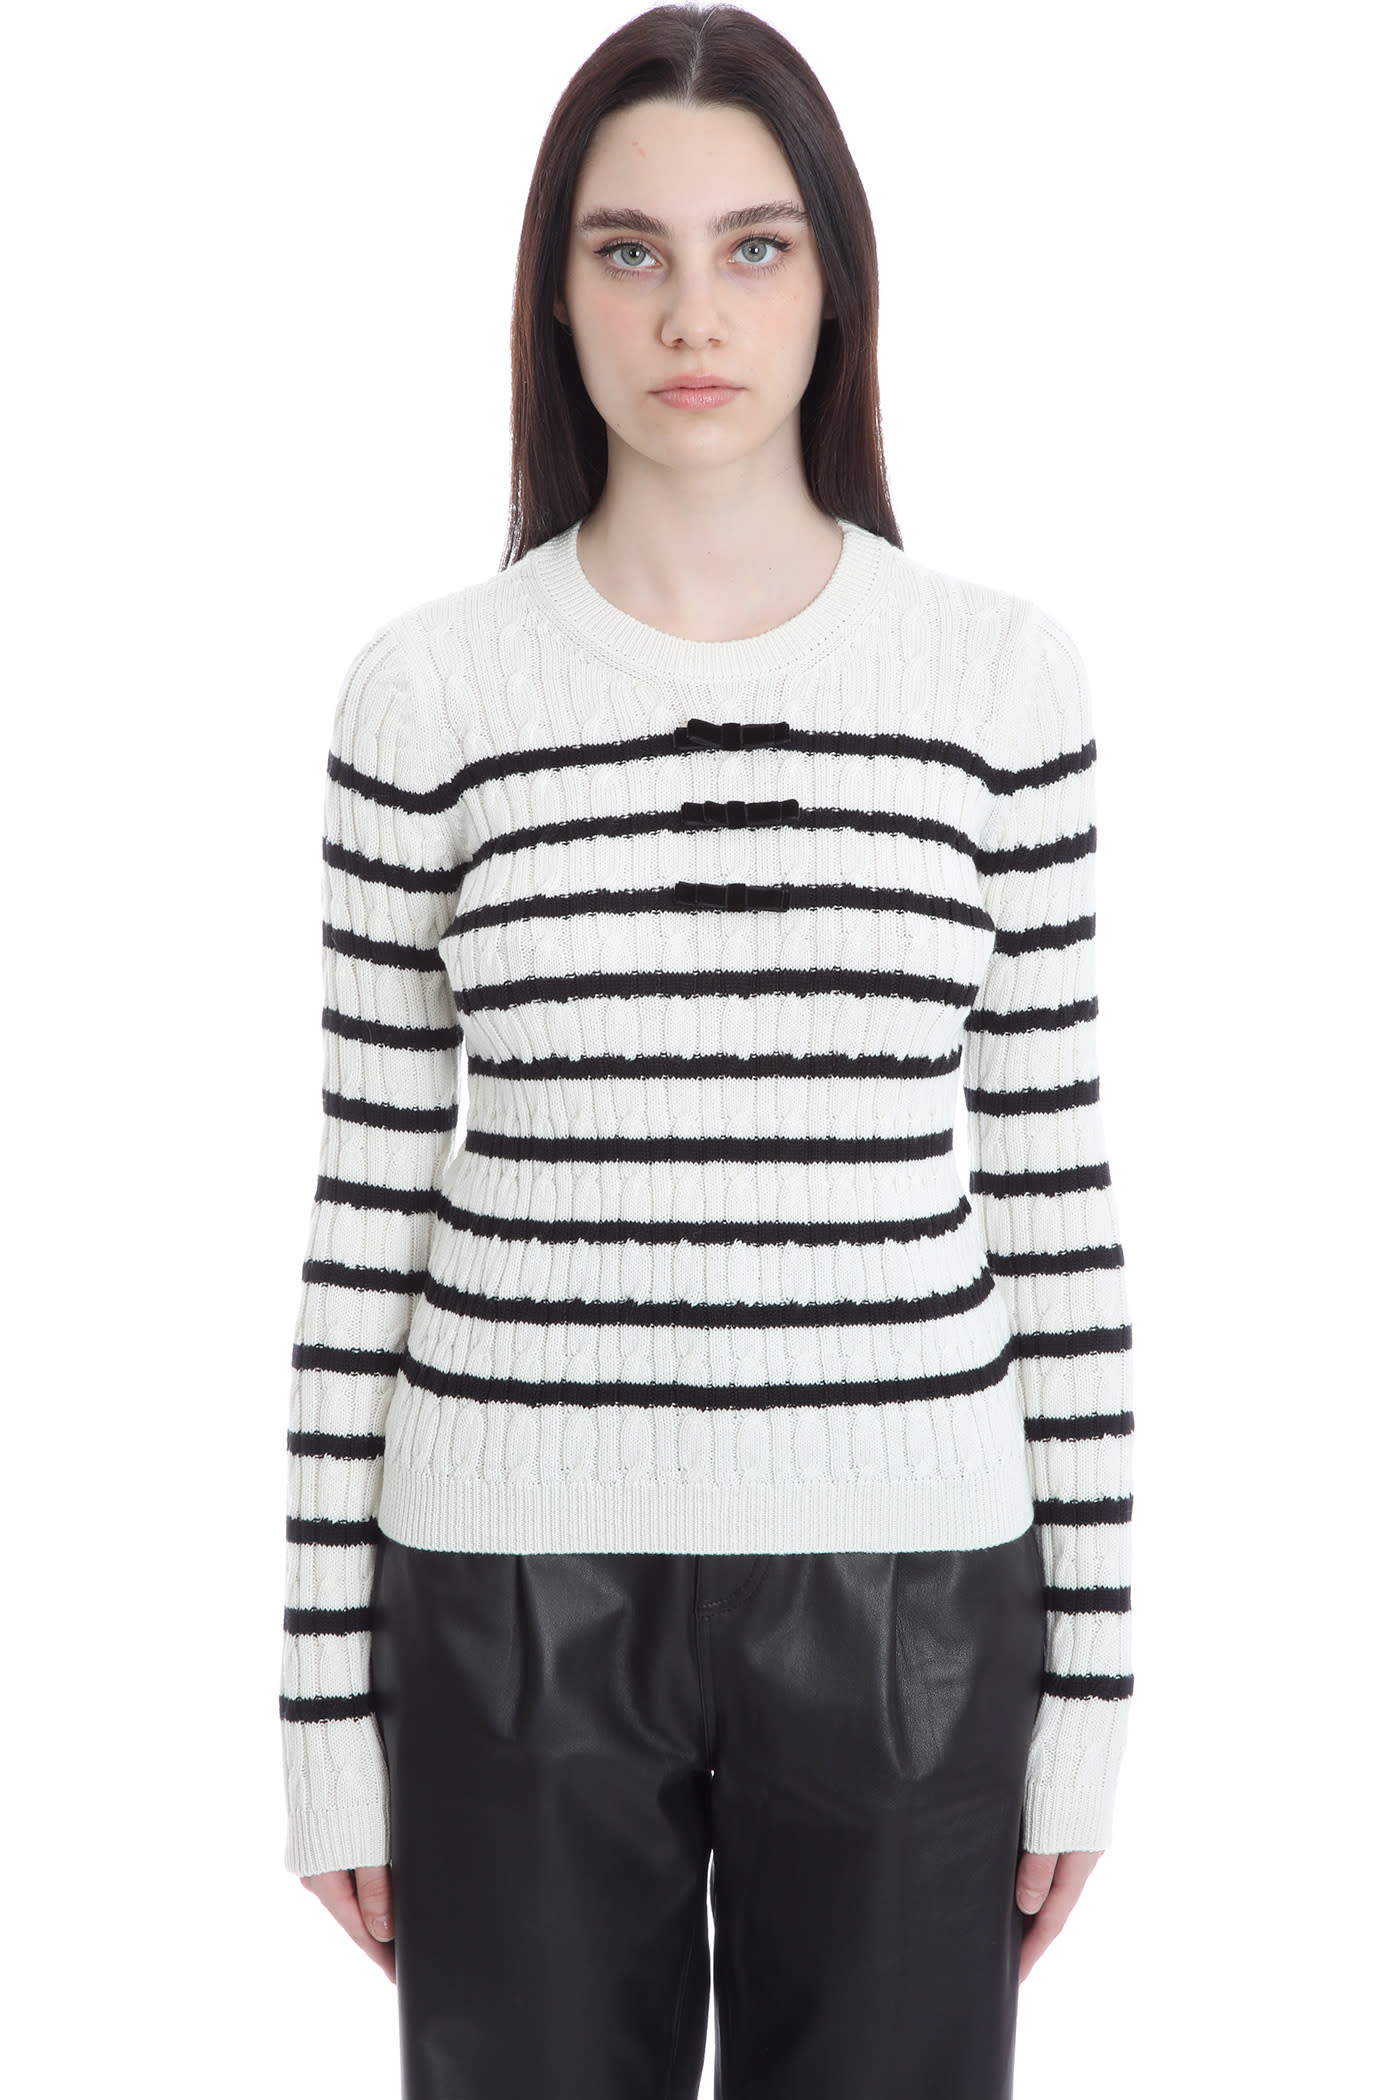 RED Valentino Knitwear In White Wool